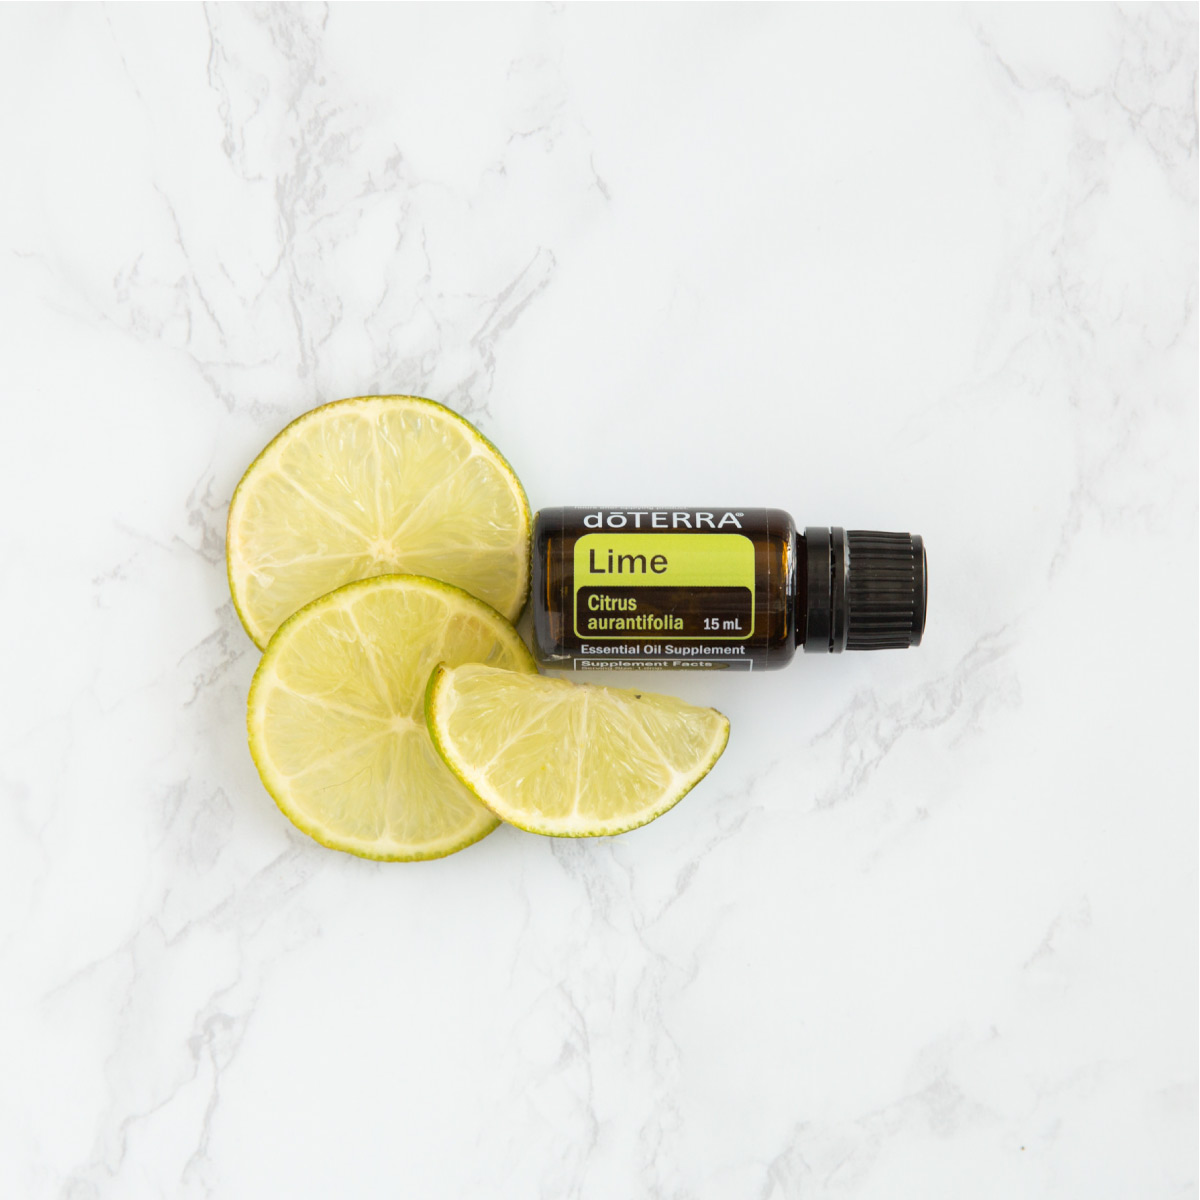 Lime essential oil bottle next to fresh lime slices. Why is Lime essential oil good for you? There are many health benefits of Lime oil, including benefits for immunity and respiratory health.